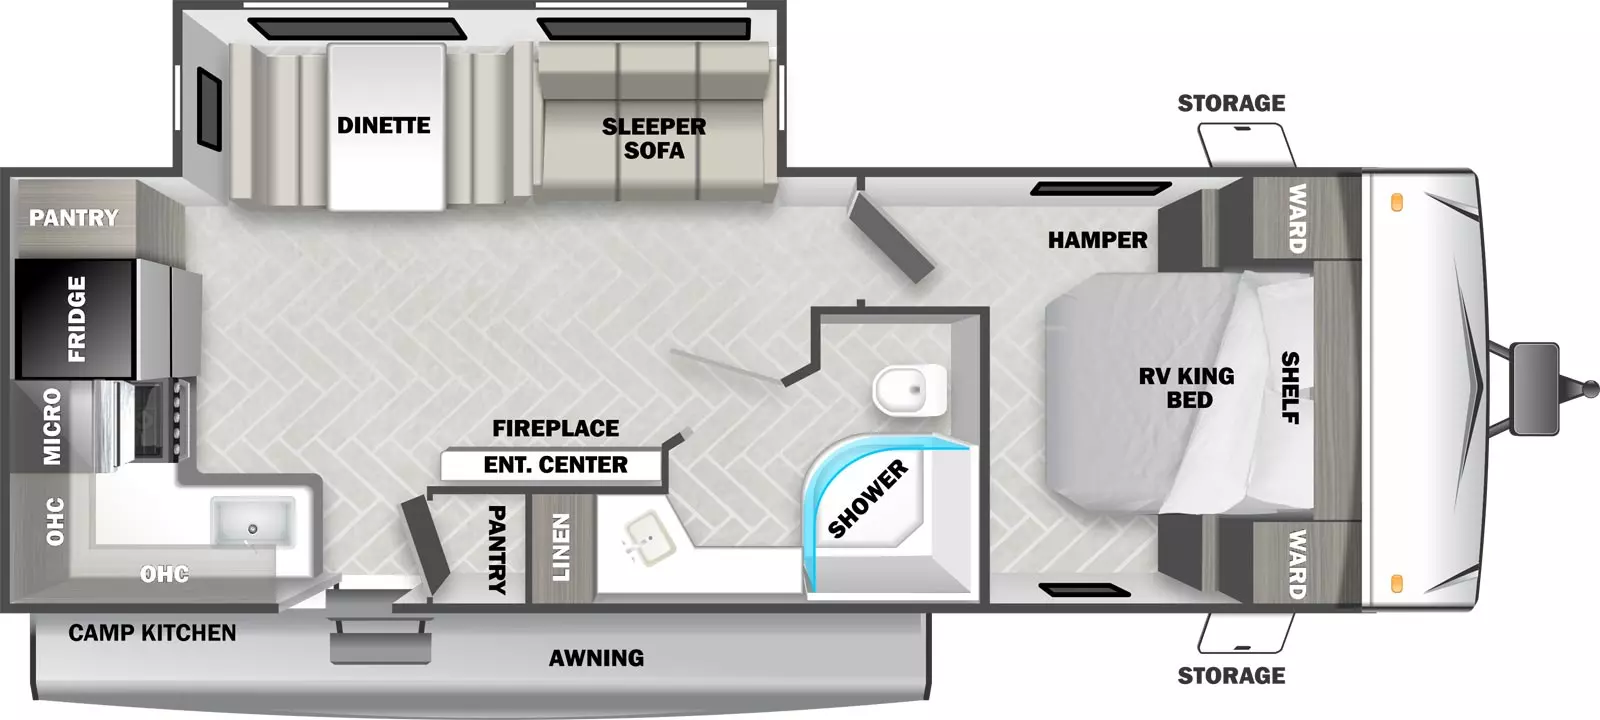 The T2500 has one slideout and one entry. Exterior features front pass through storage, external shower, awning, and camp kitchen with refrigerator and griddle. Interior layout front to back: RV king bed with overhead cabinet and wardrobes on each side; door side full bathroom with radius shower, linen area, and medicine cabinet; off-door side slideout with sleeper sofa and booth dinette; entertainment center with fireplace along inner wall, pantry and entry door on door side; kitchen counter with sink and overhead cabinet wraps from door side to rear with range, microwave, refrigerator and pantry.